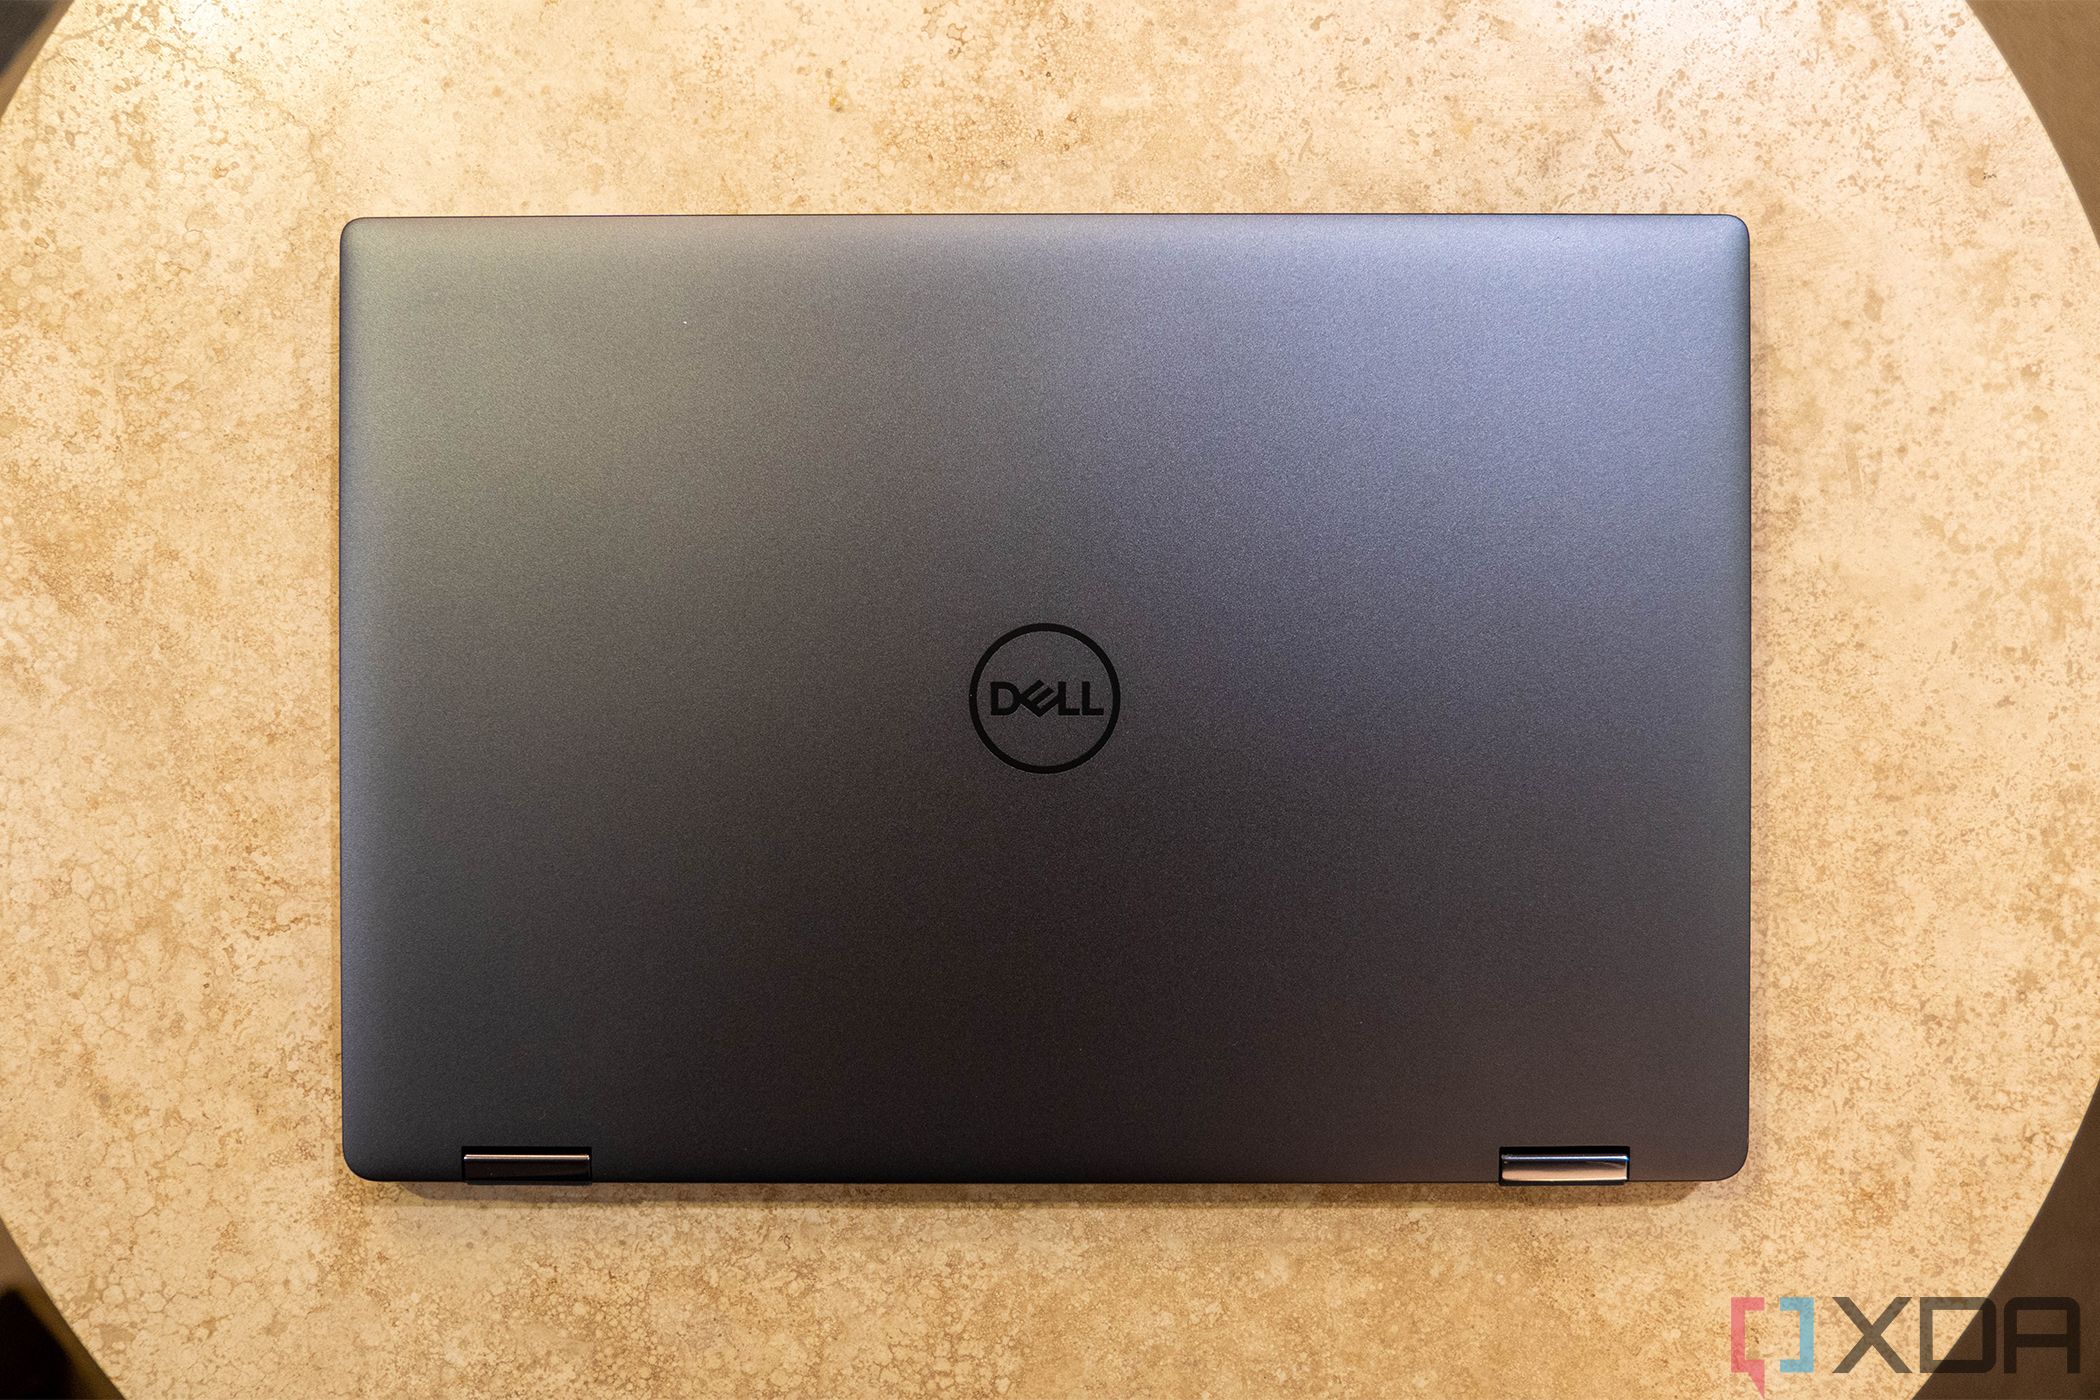 Top down view of Dell laptop